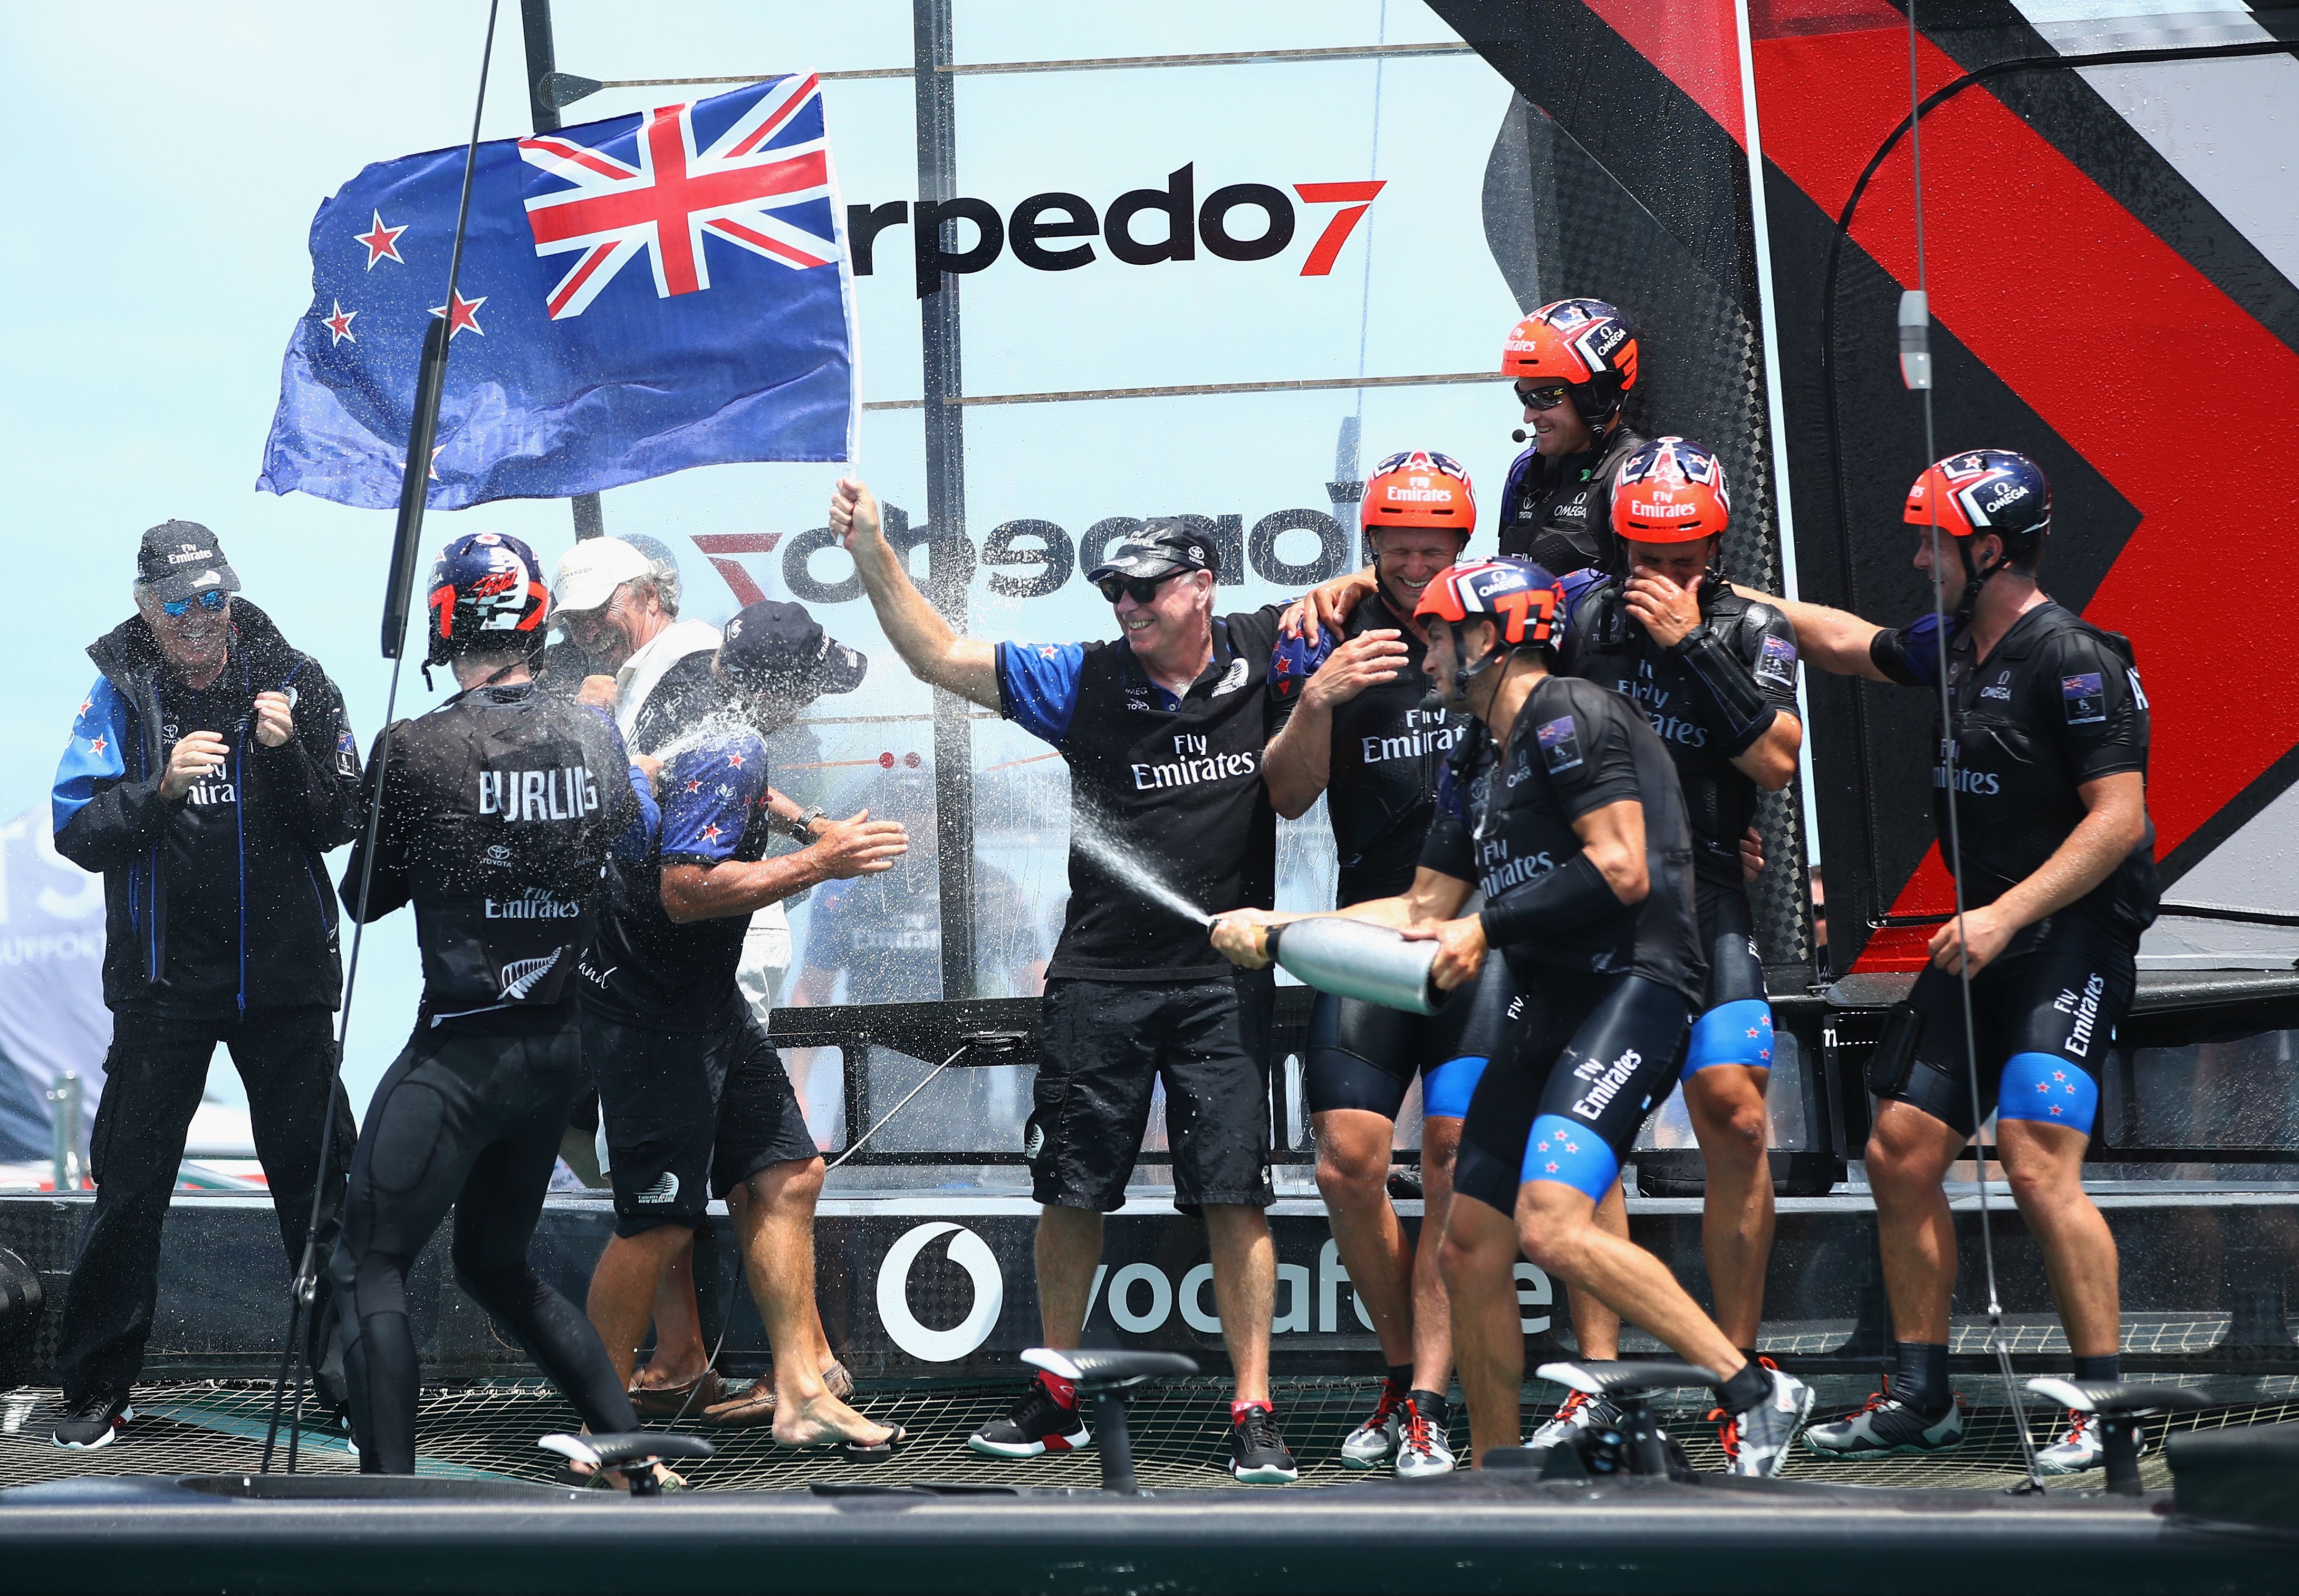 America's Cup 2017: How Louis Vuitton create the trophy case - NZ Herald